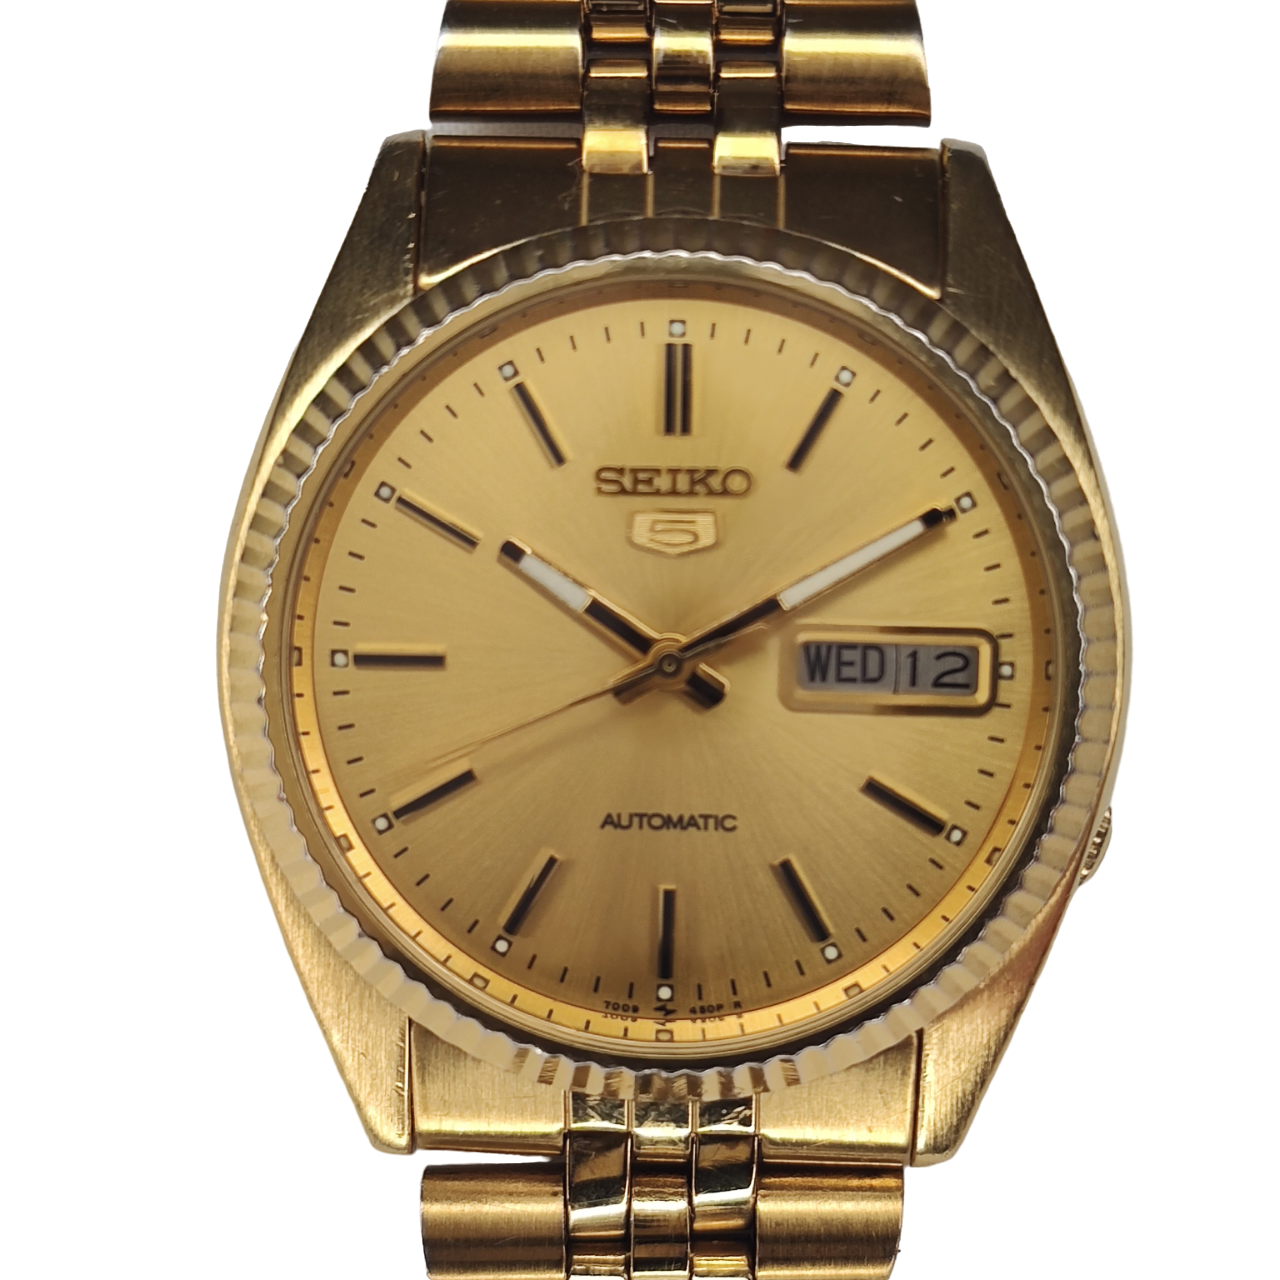 Seiko Datejust SNJX94 Automatic 7009-3110 Circa 1992 Rare Discontinued –  Temple of Time